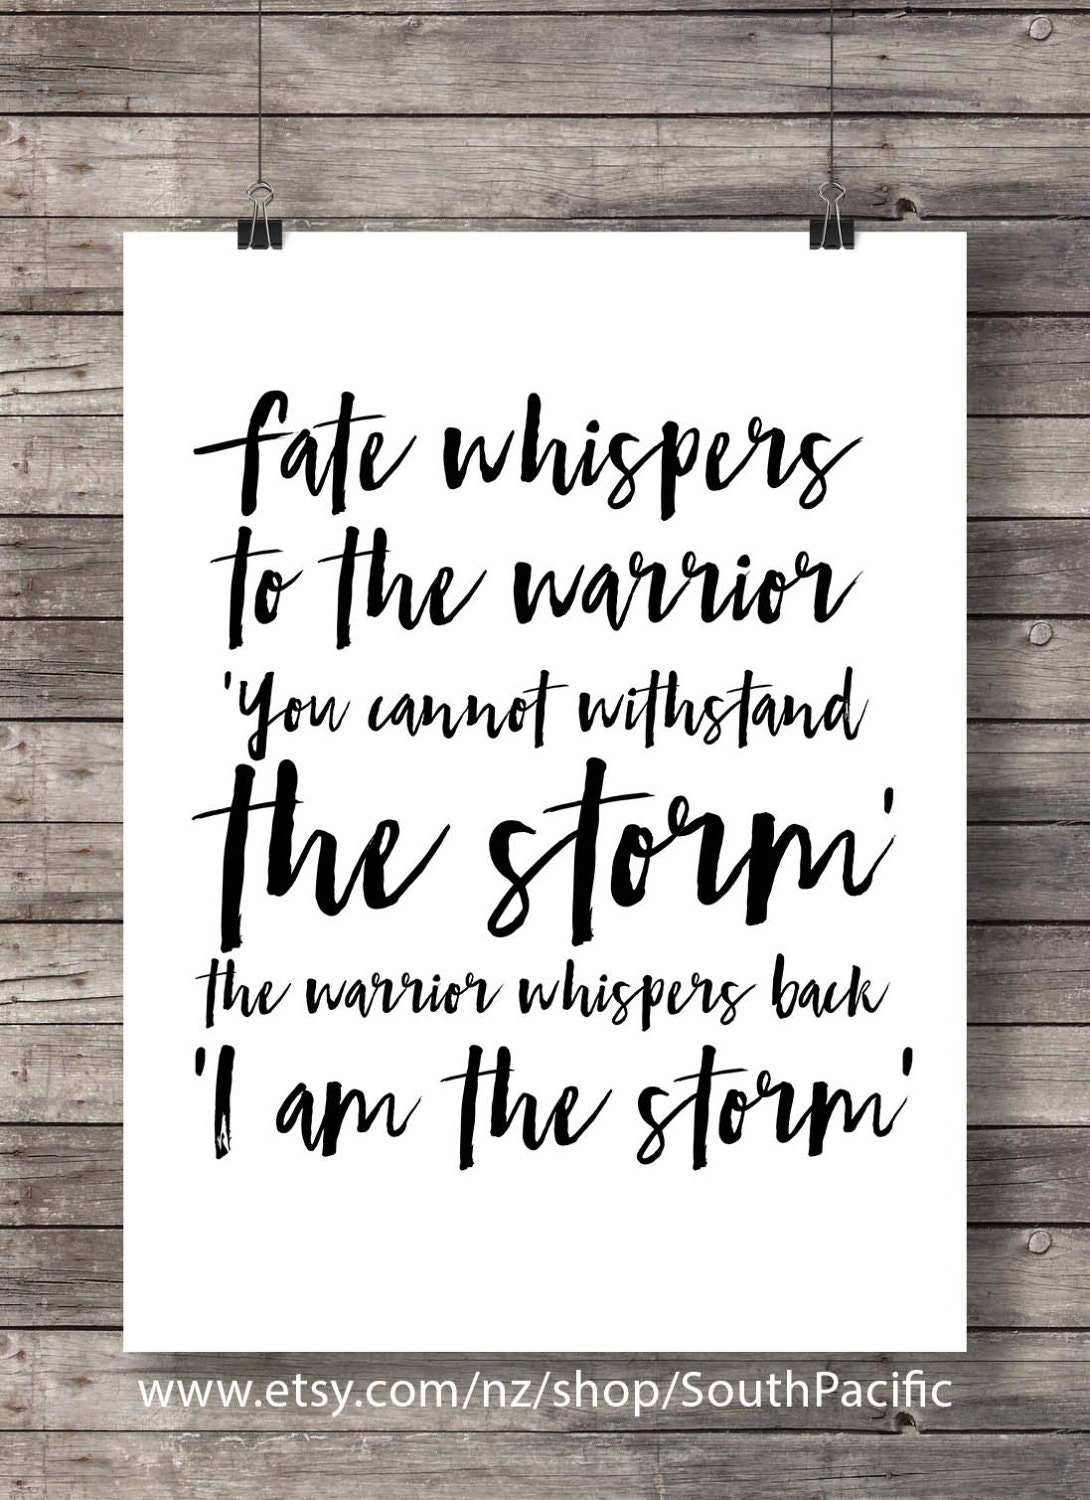 I Am the Storm  The Grief Warrior Project